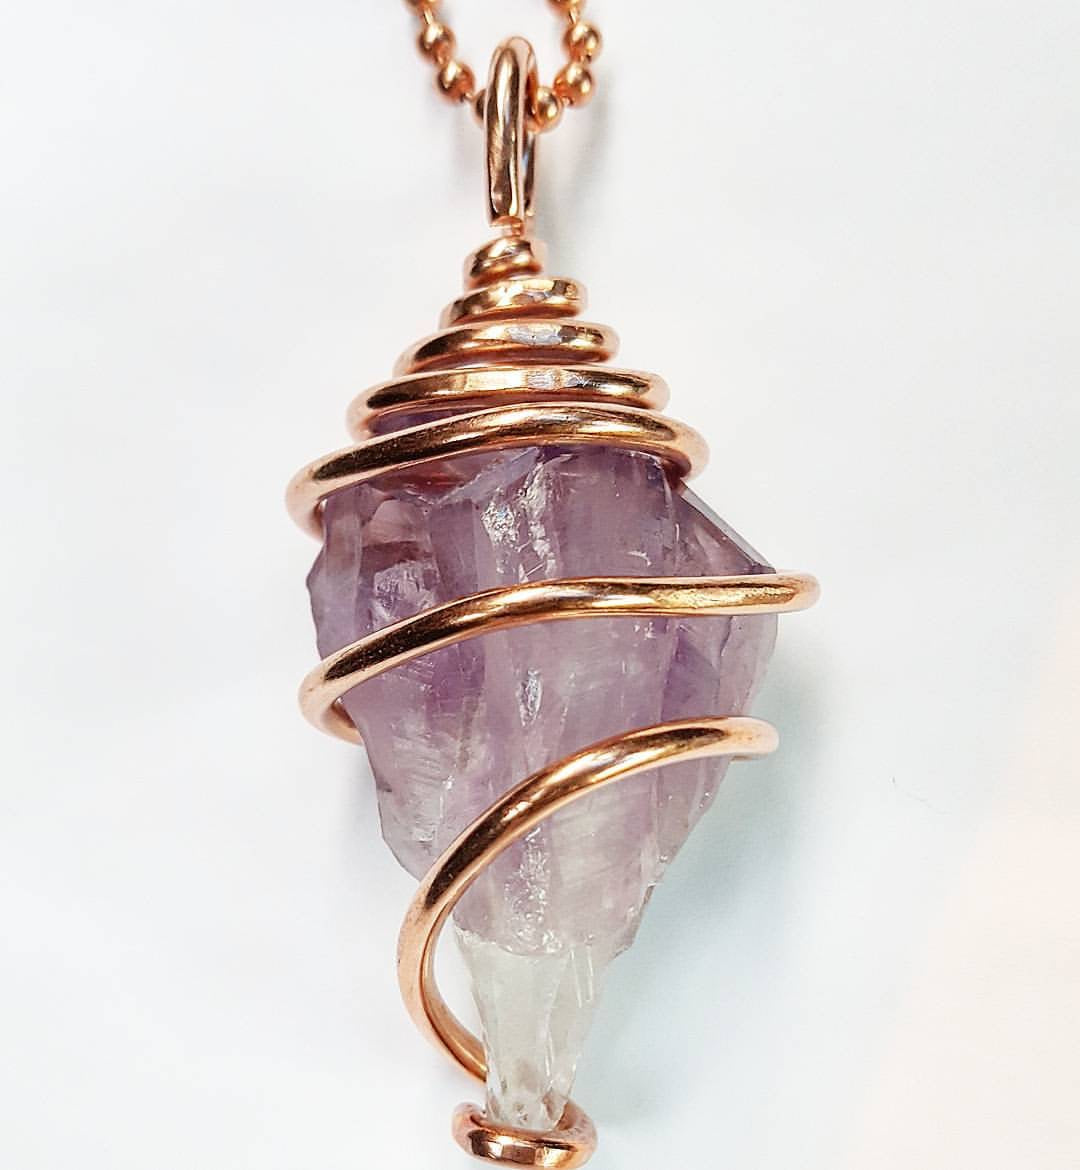 Copper Wrapped Amethyst Necklace